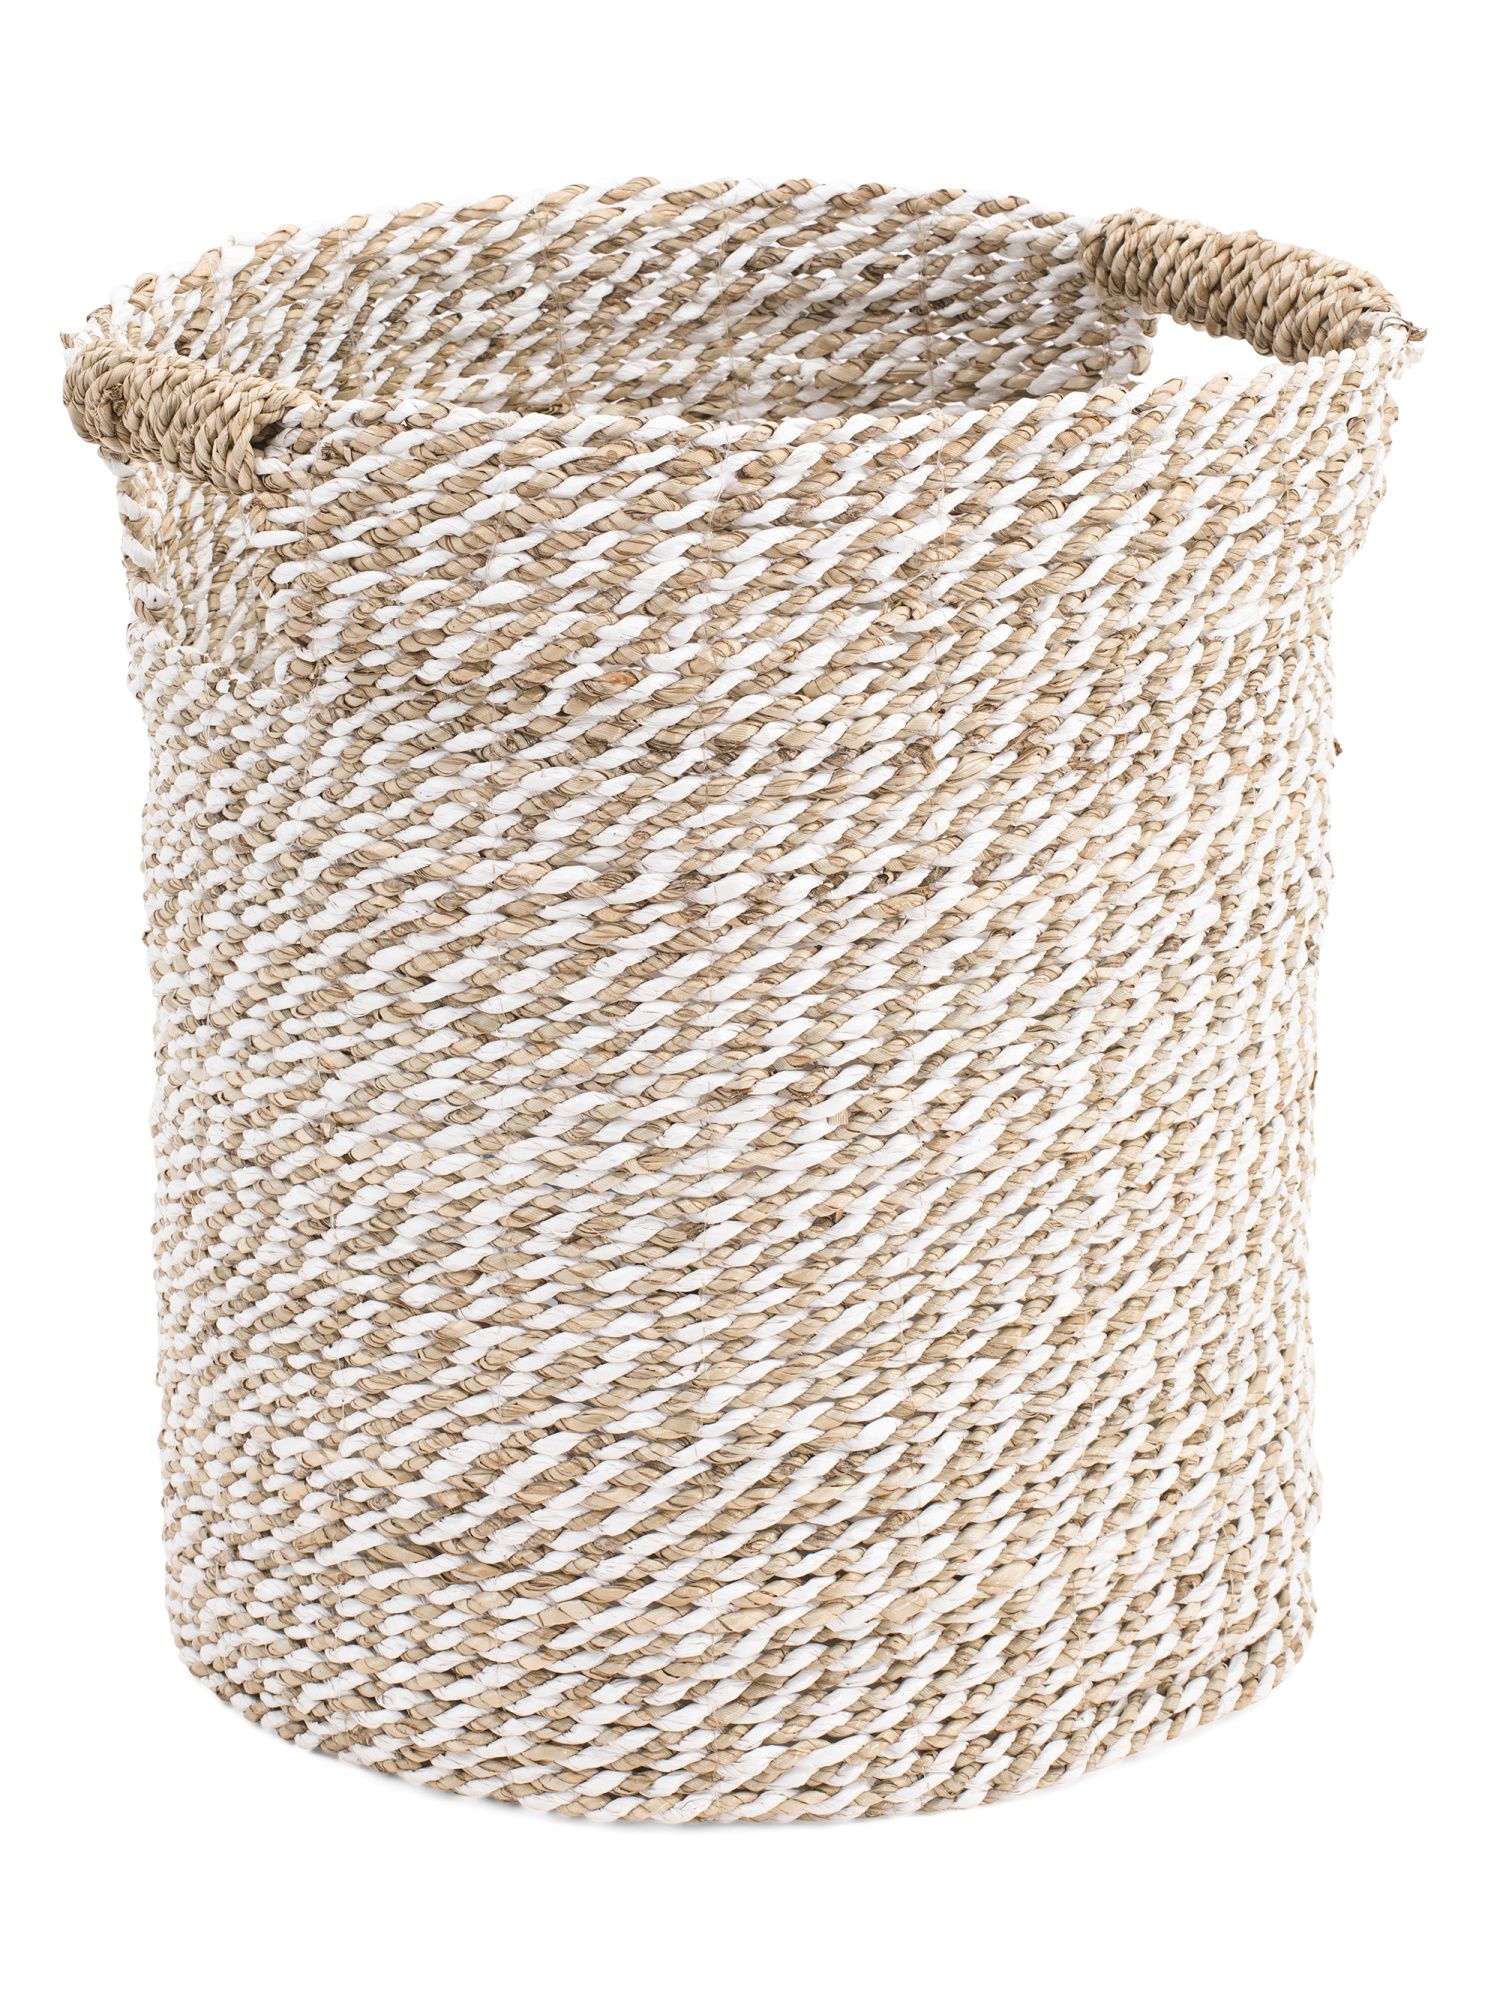 MADE IN INDONESIA
Large Raffia Twisted Round Basket

$16.99
Compare At  $22 Help
 | TJ Maxx